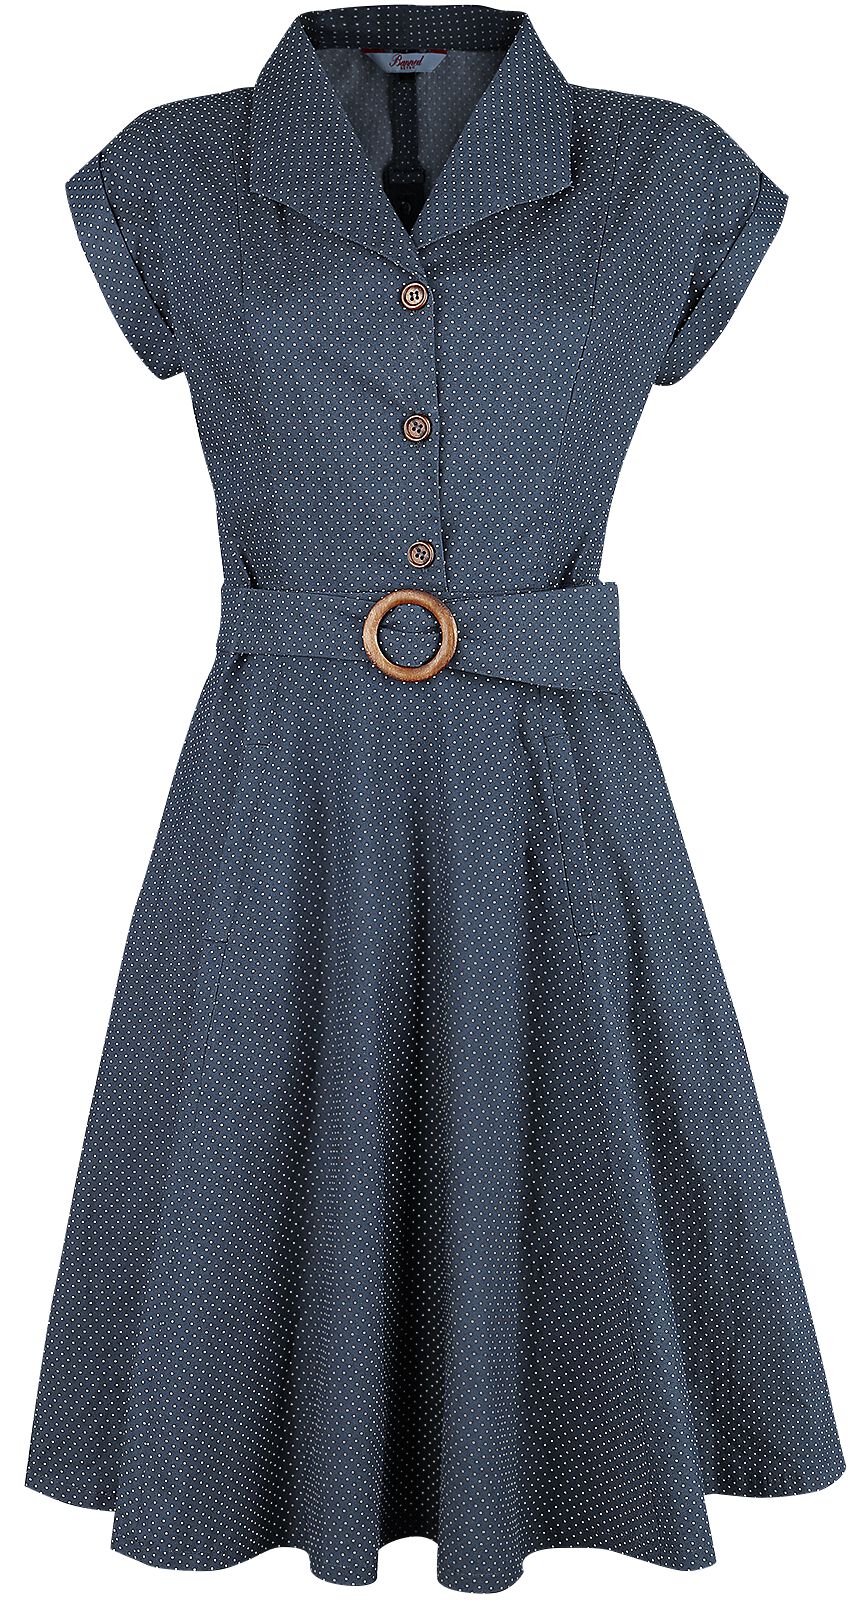 Image of Abito media lunghezza Rockabilly di Banned Retro - Spot Perfection Fit & Flare Dress - XS a 4XL - Donna - blu navy